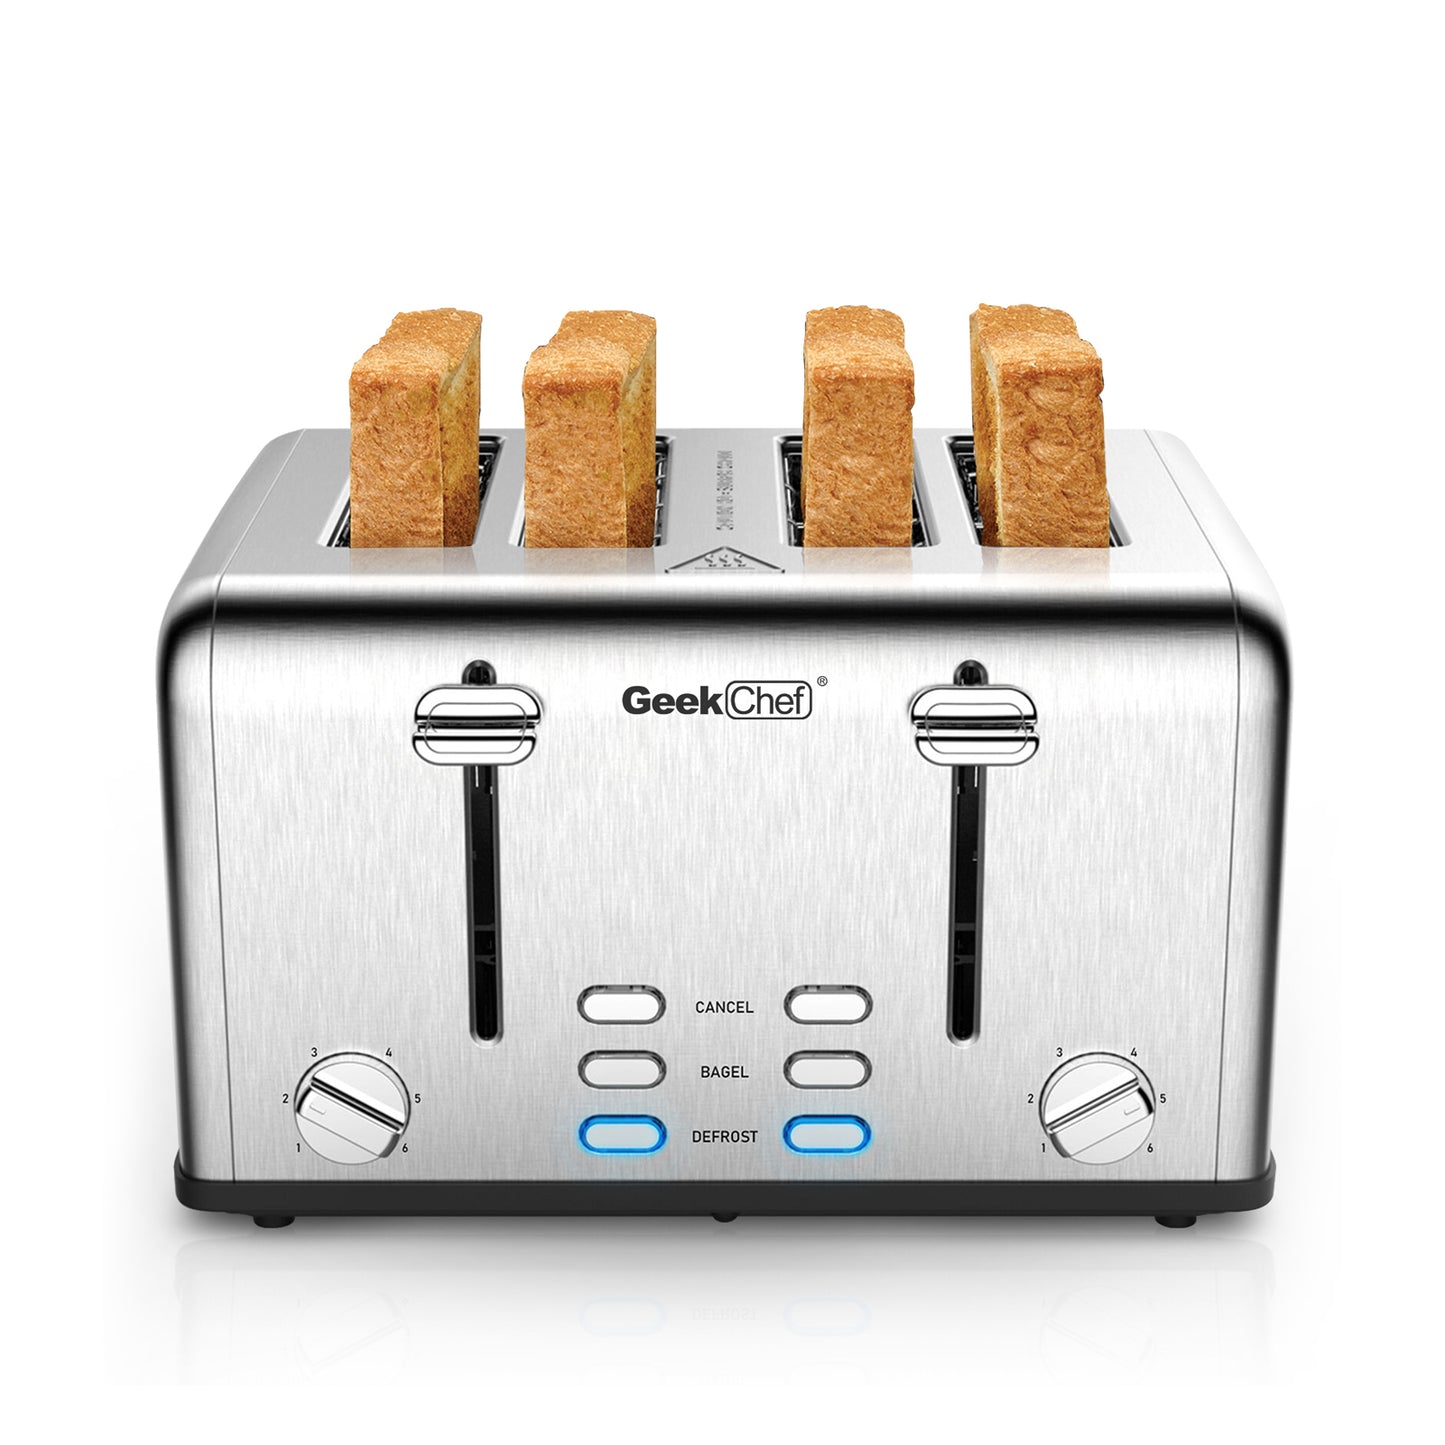 Toaster Stainless Steel Extra-Wide Slot Toaster With Dual Control Panels